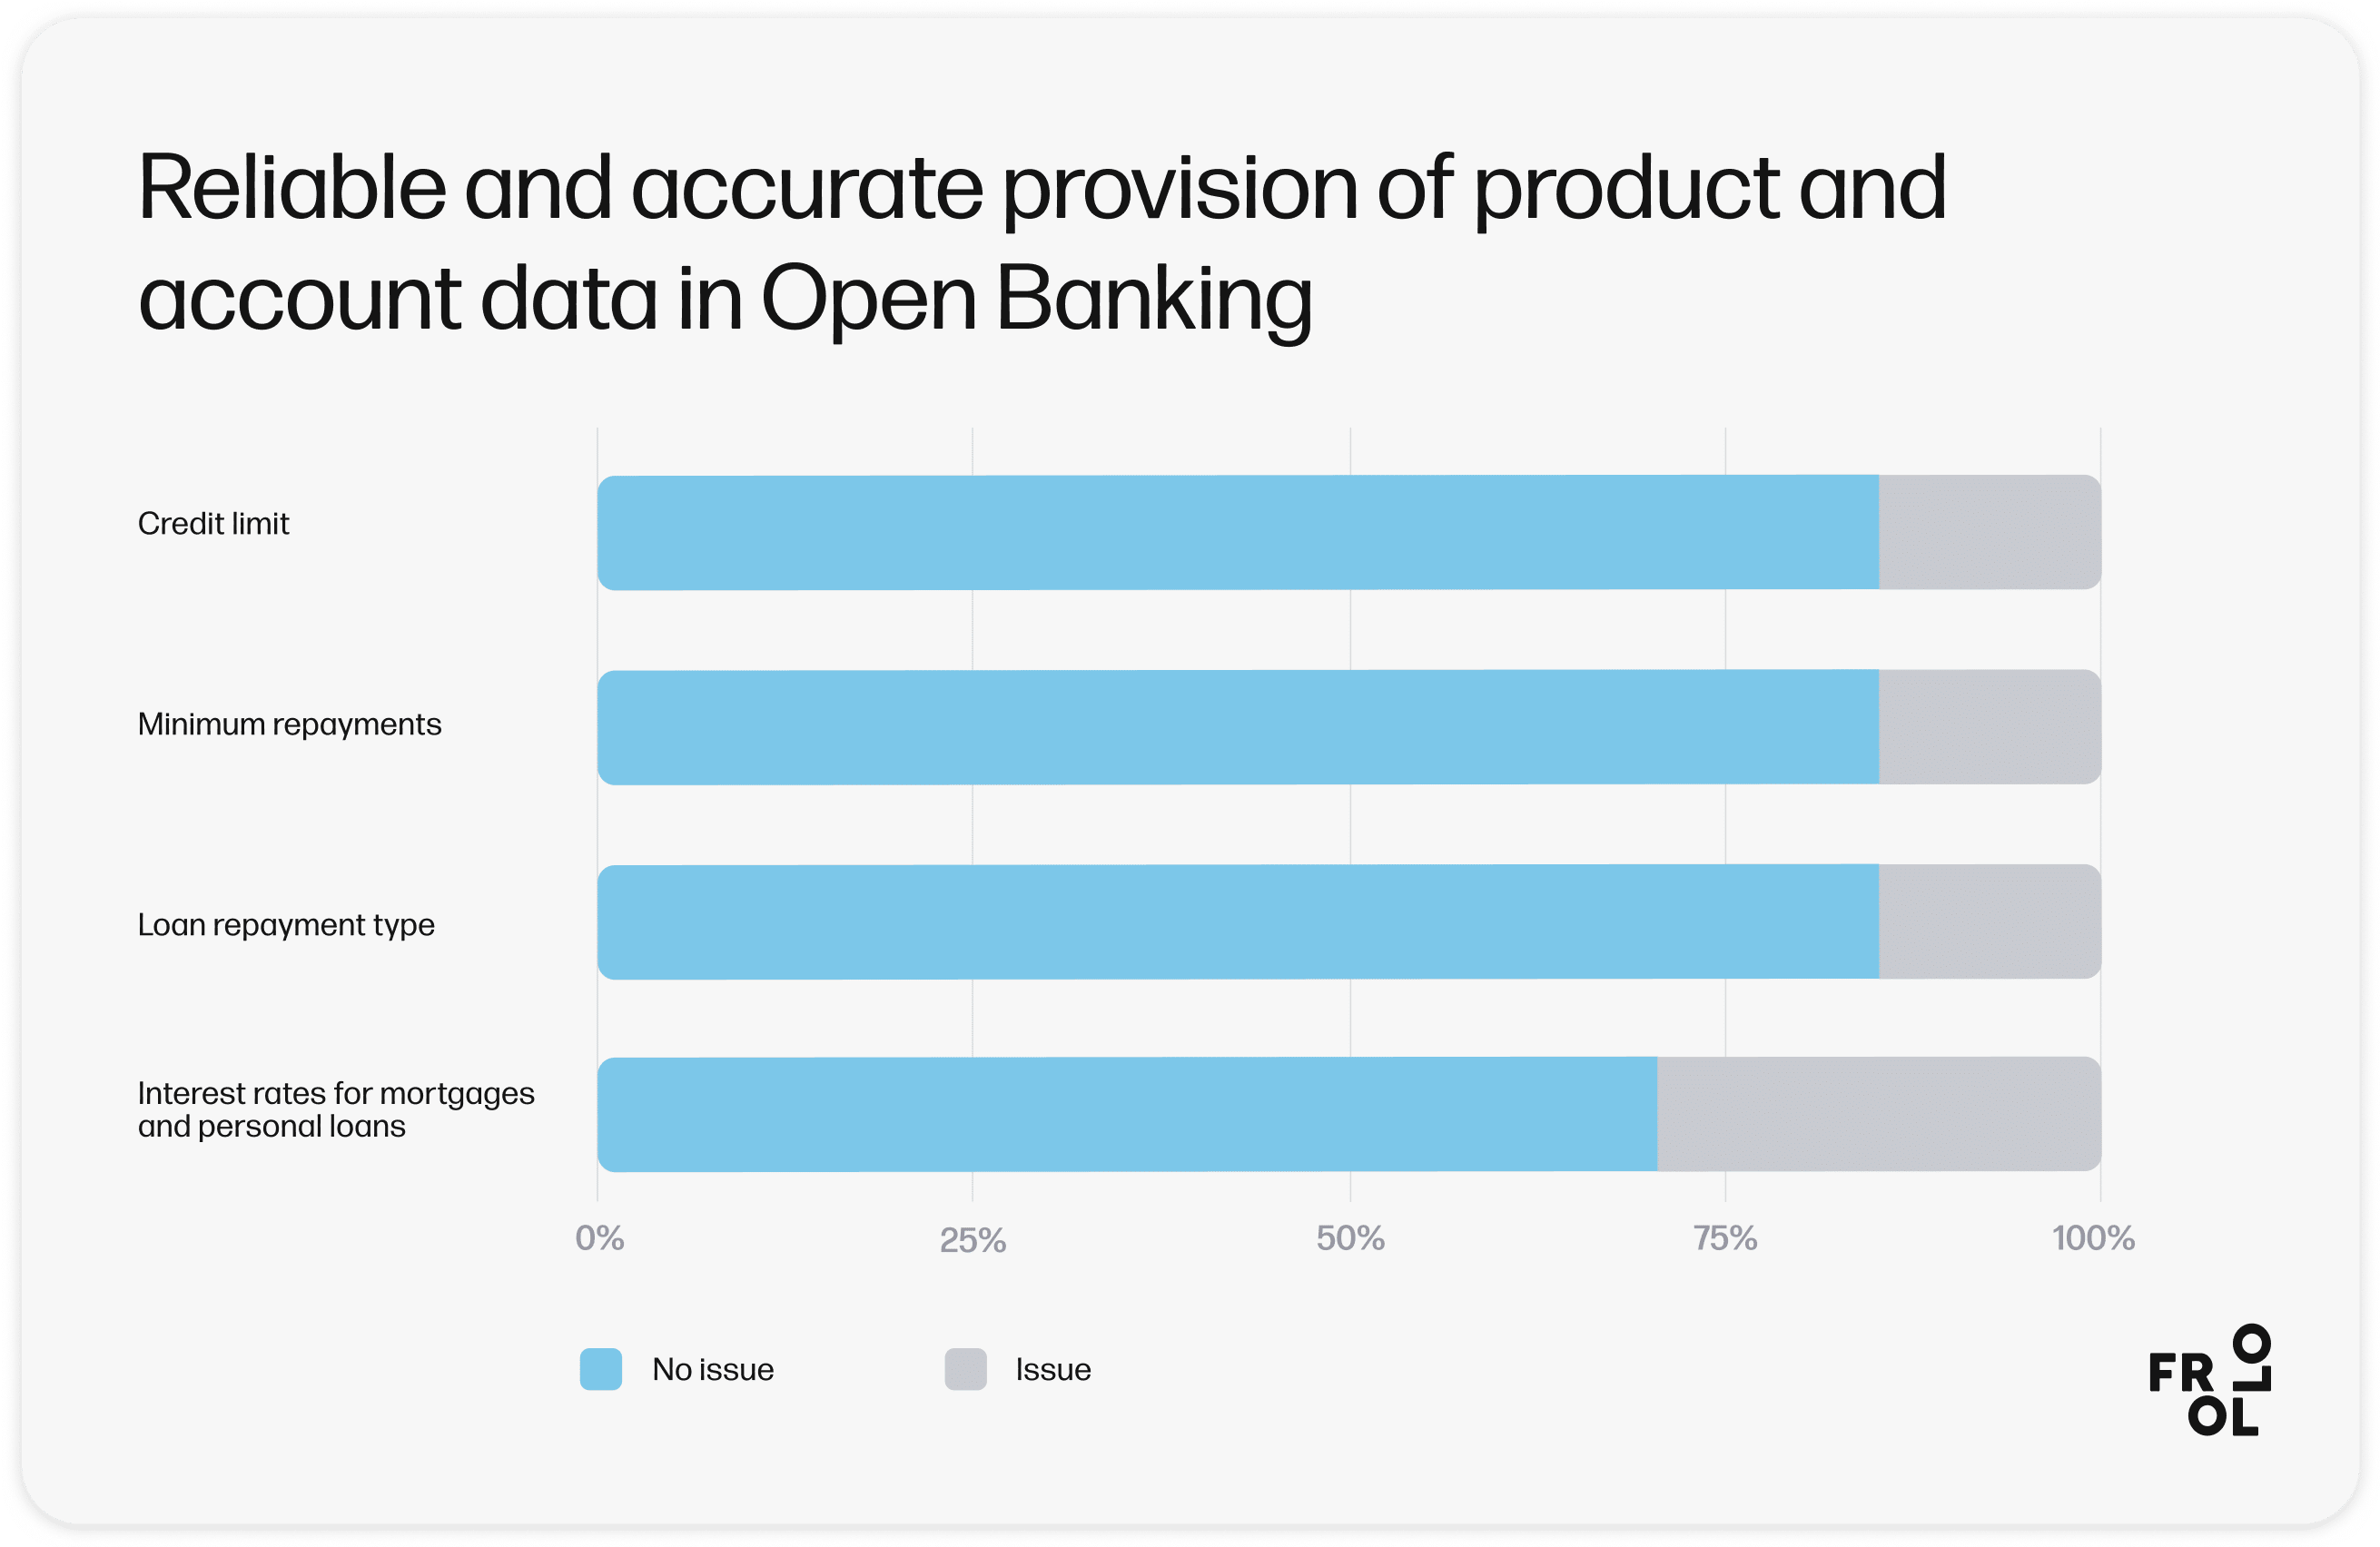 Reliable and accurate provision of product and account data in Open Banking